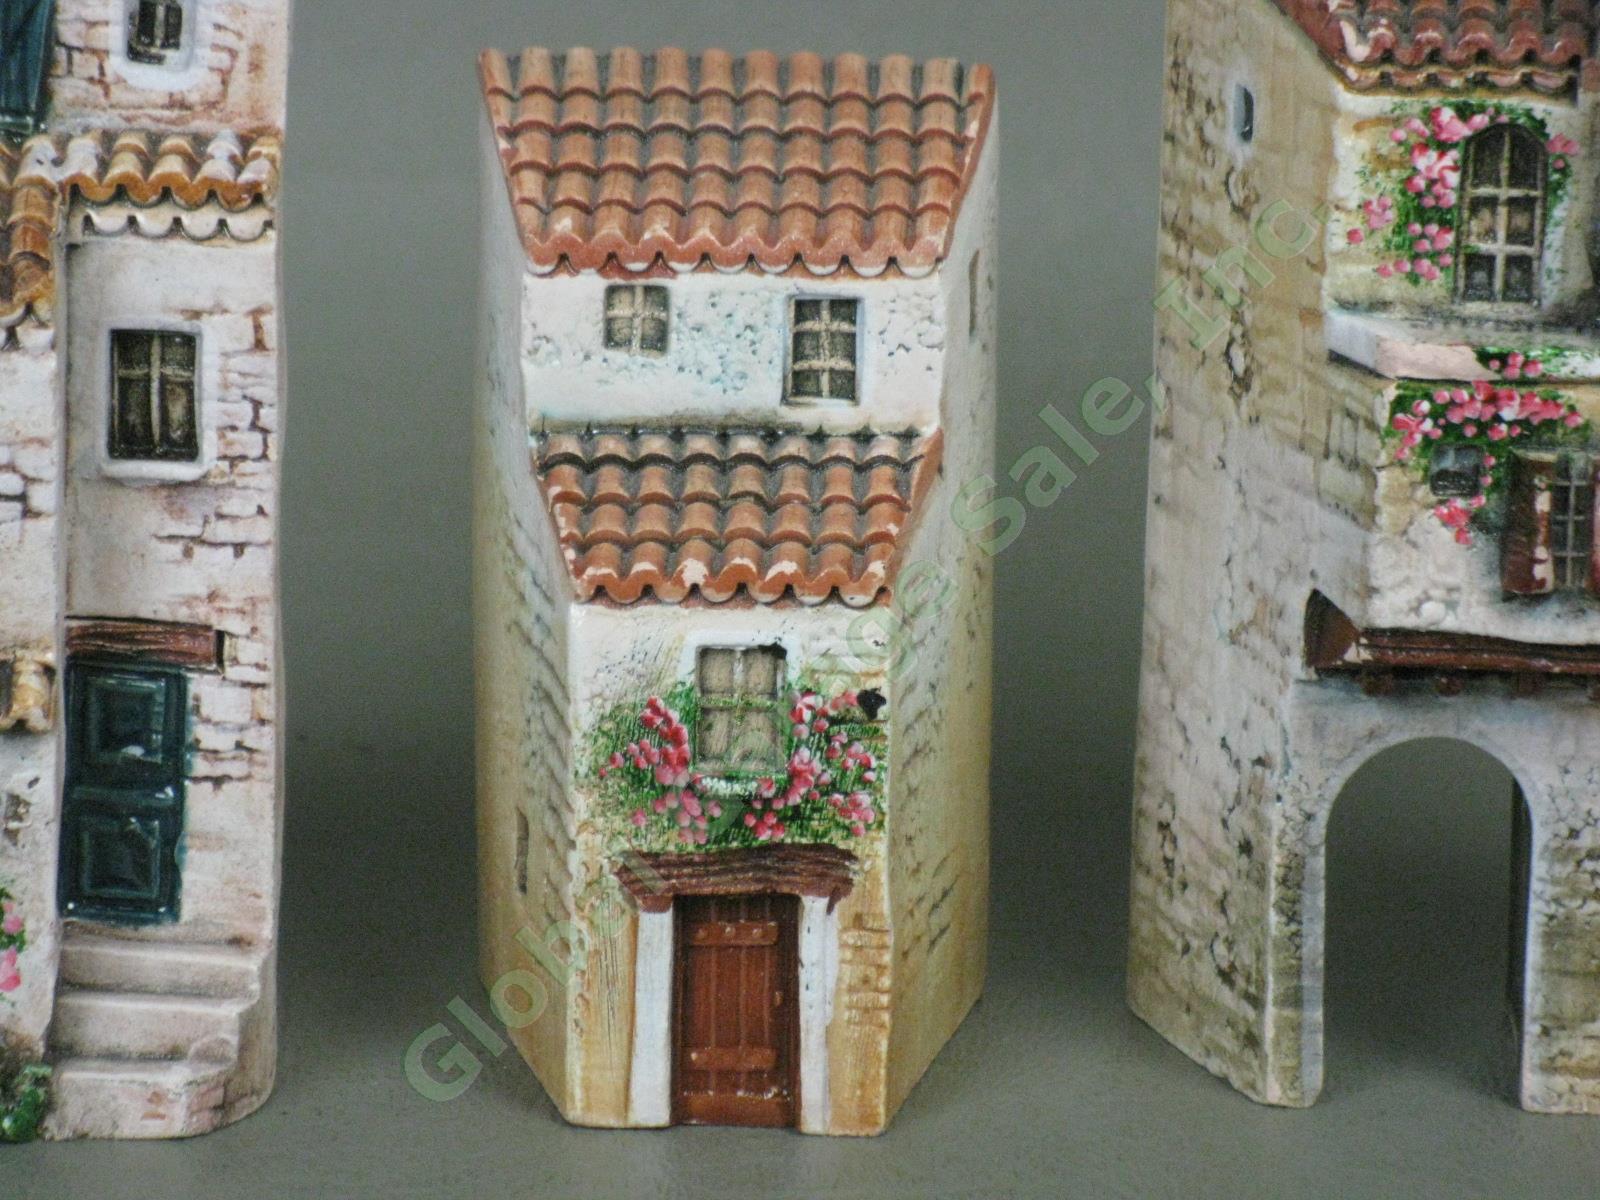 3 Dominique Gault Miniature Limoge Clay Pottery Houses Provence France 1995-2001 3